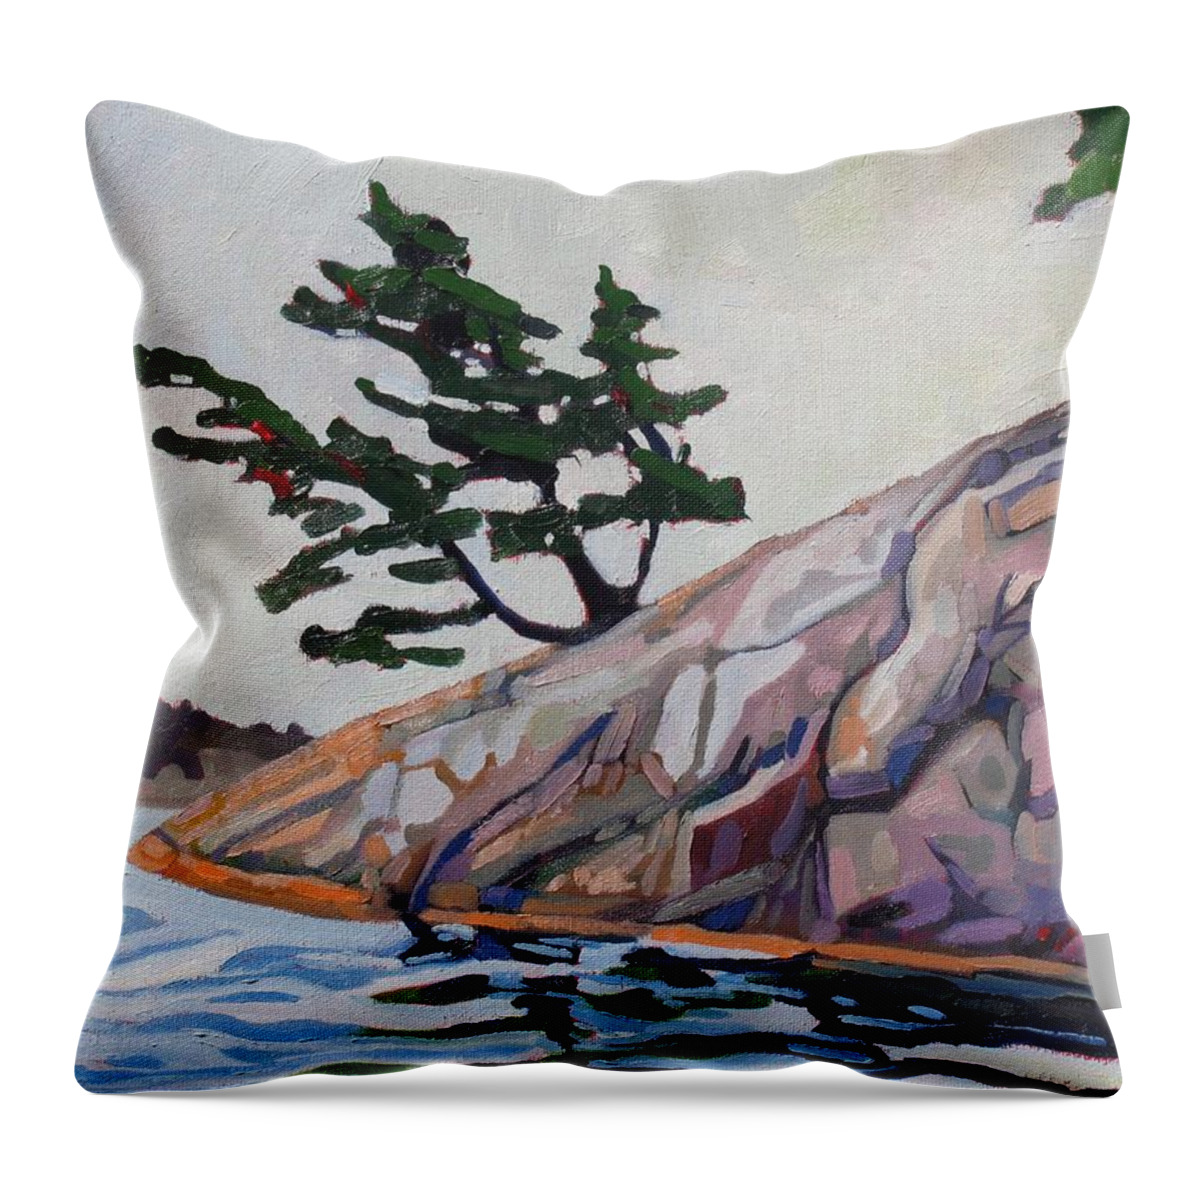 903 Throw Pillow featuring the painting Out of The Rock by Phil Chadwick